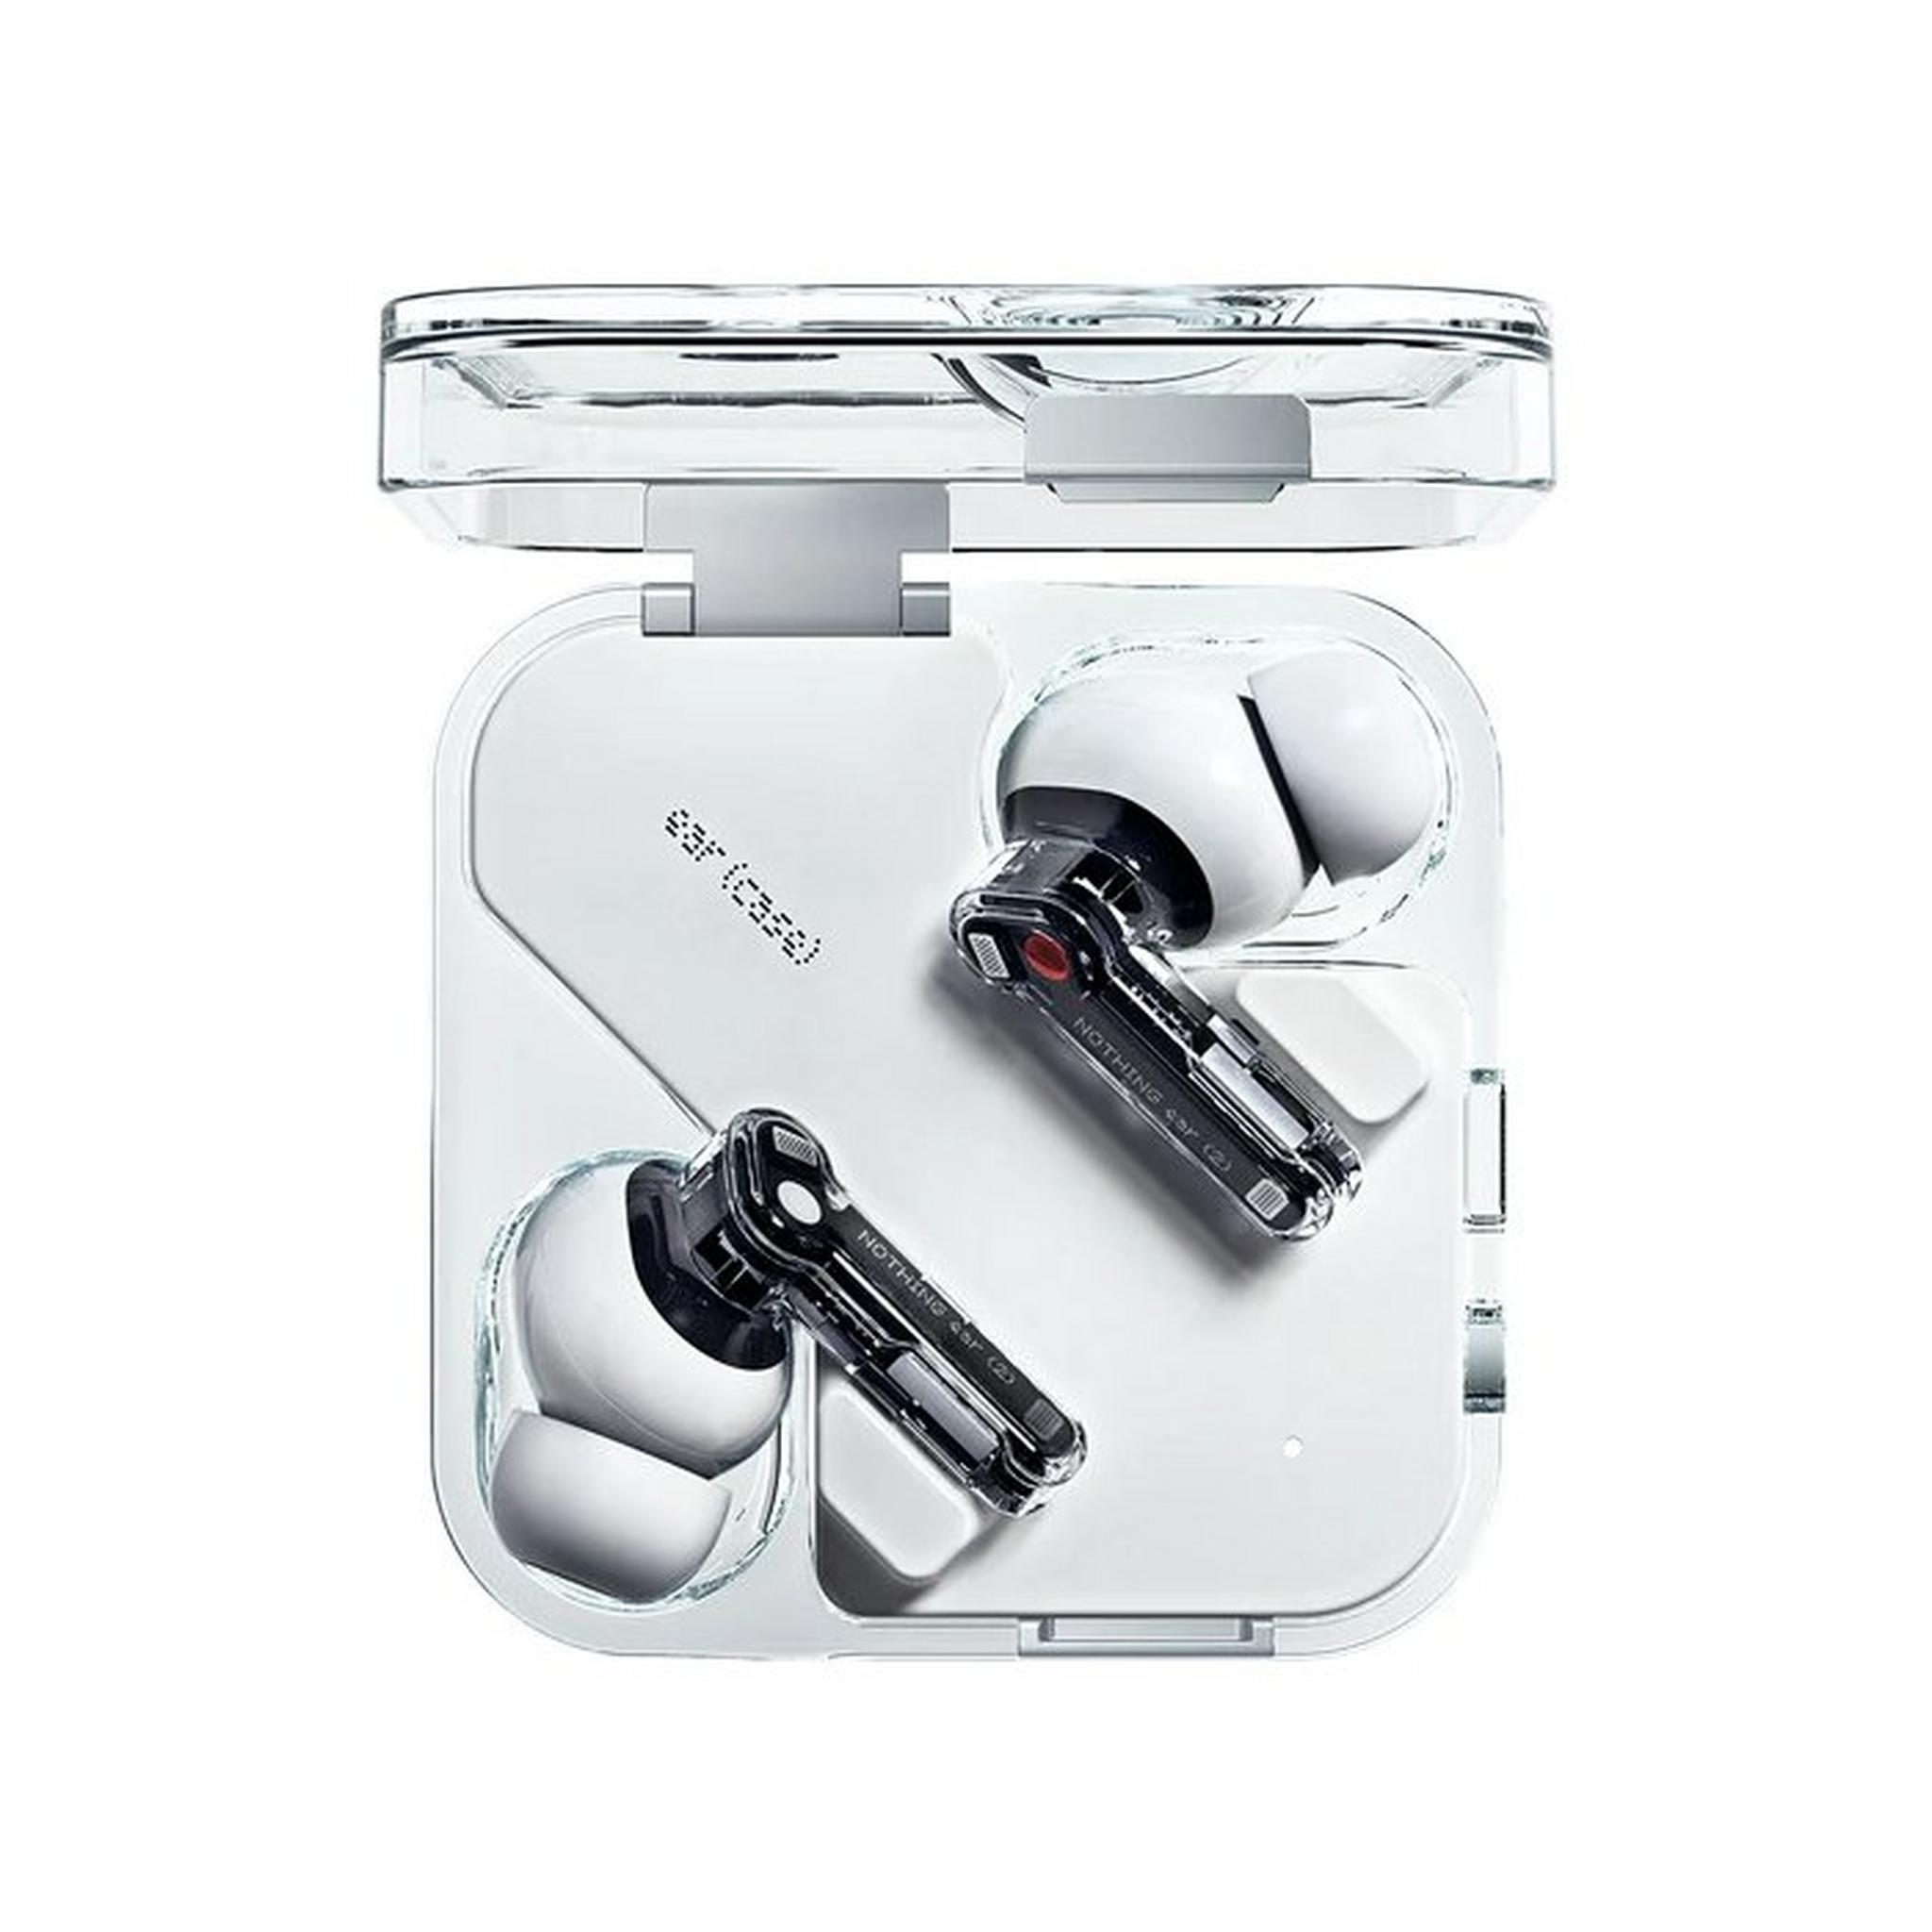 NOTHING Ear (2) Wireless Earbuds, A10600019 – White